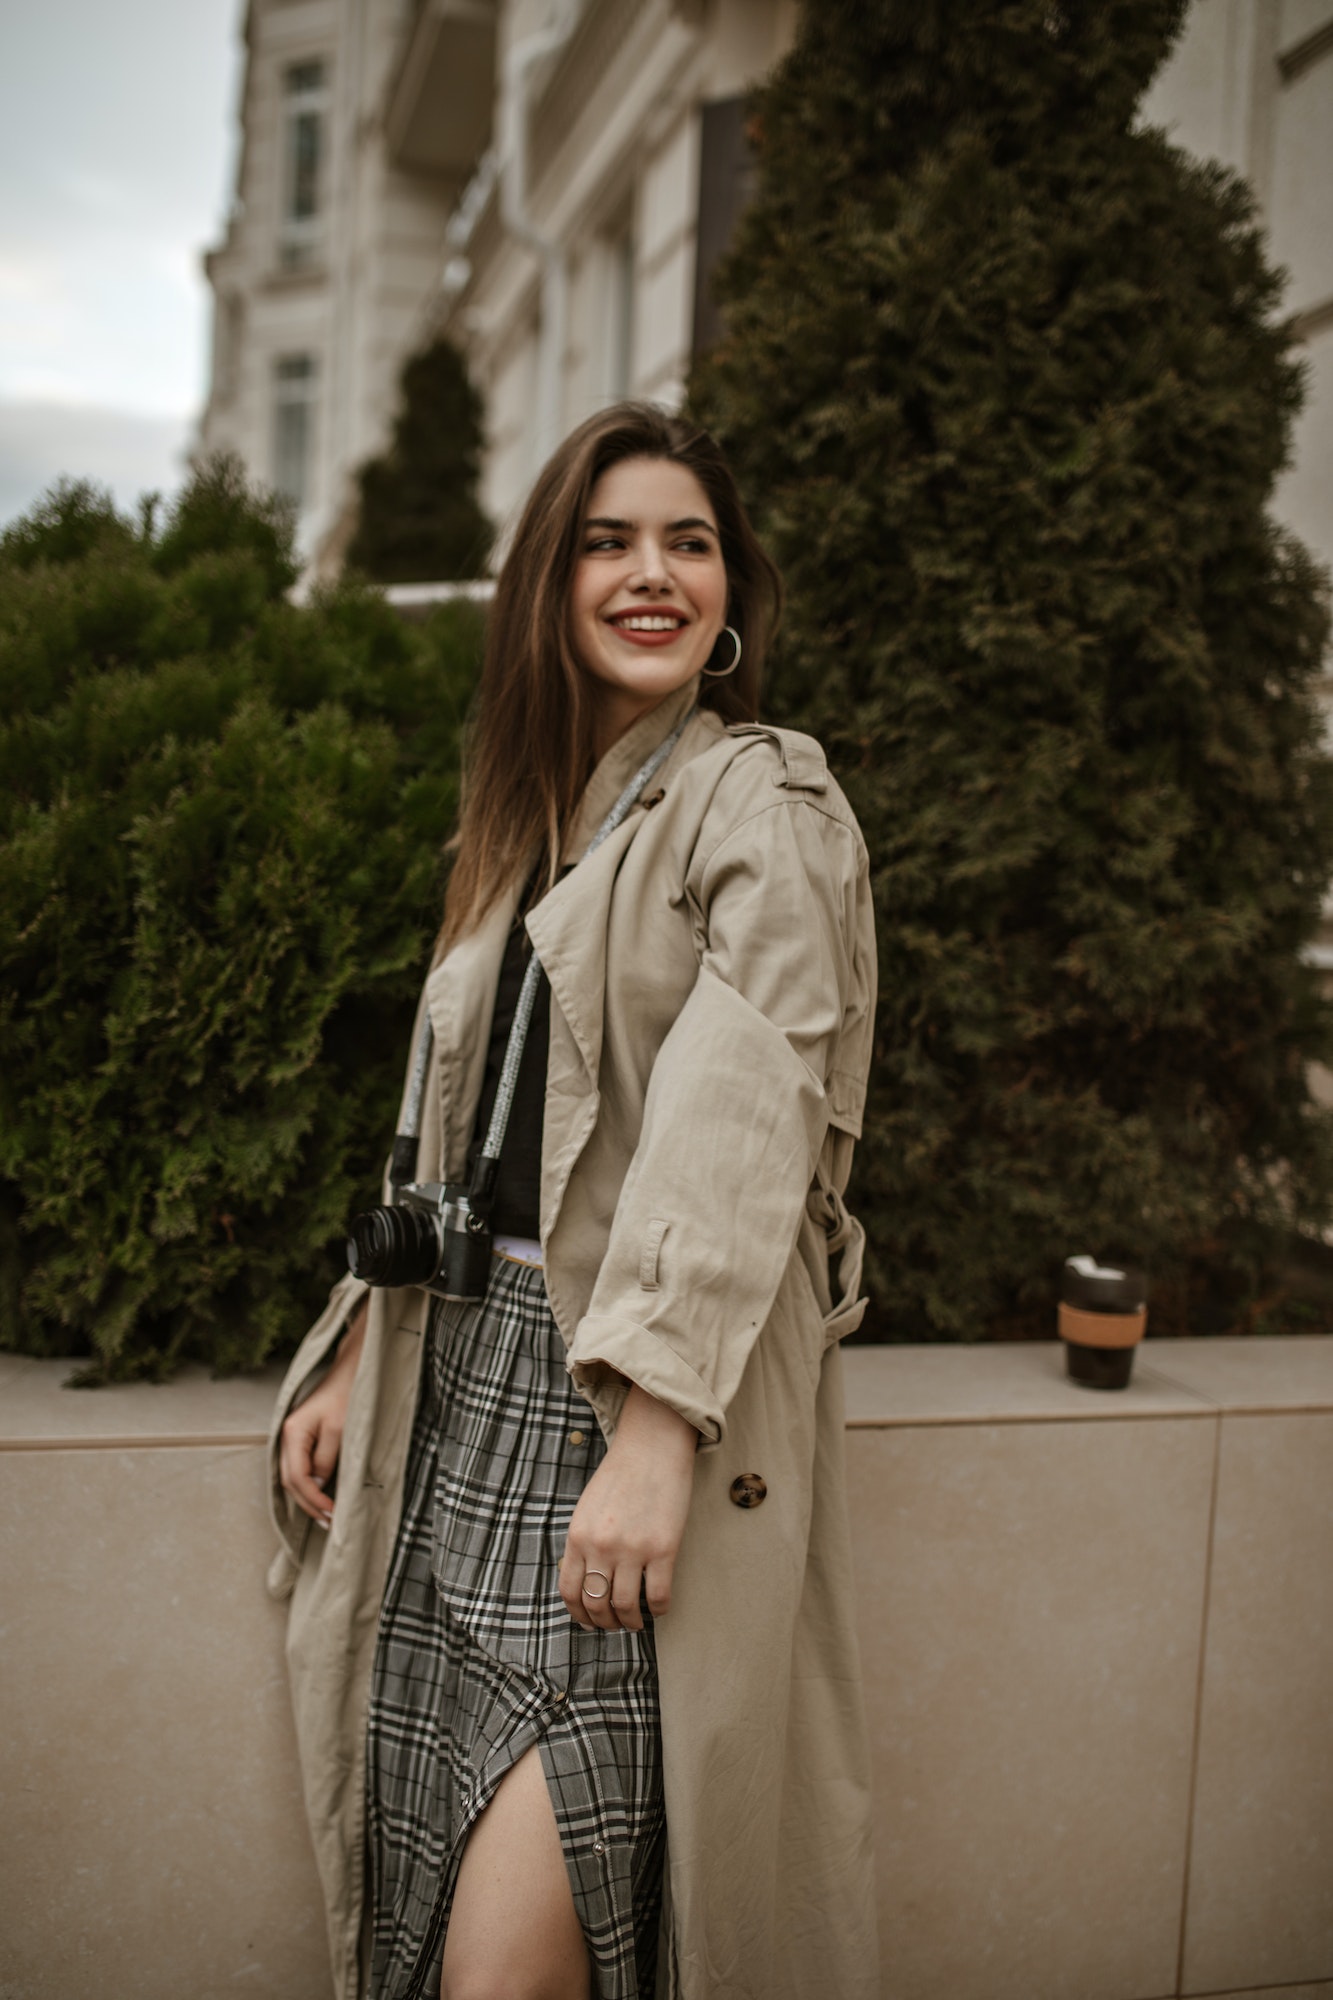 Cheerful brunette young woman in stylish beige trench coat and checkered skirt smilies sincerely an